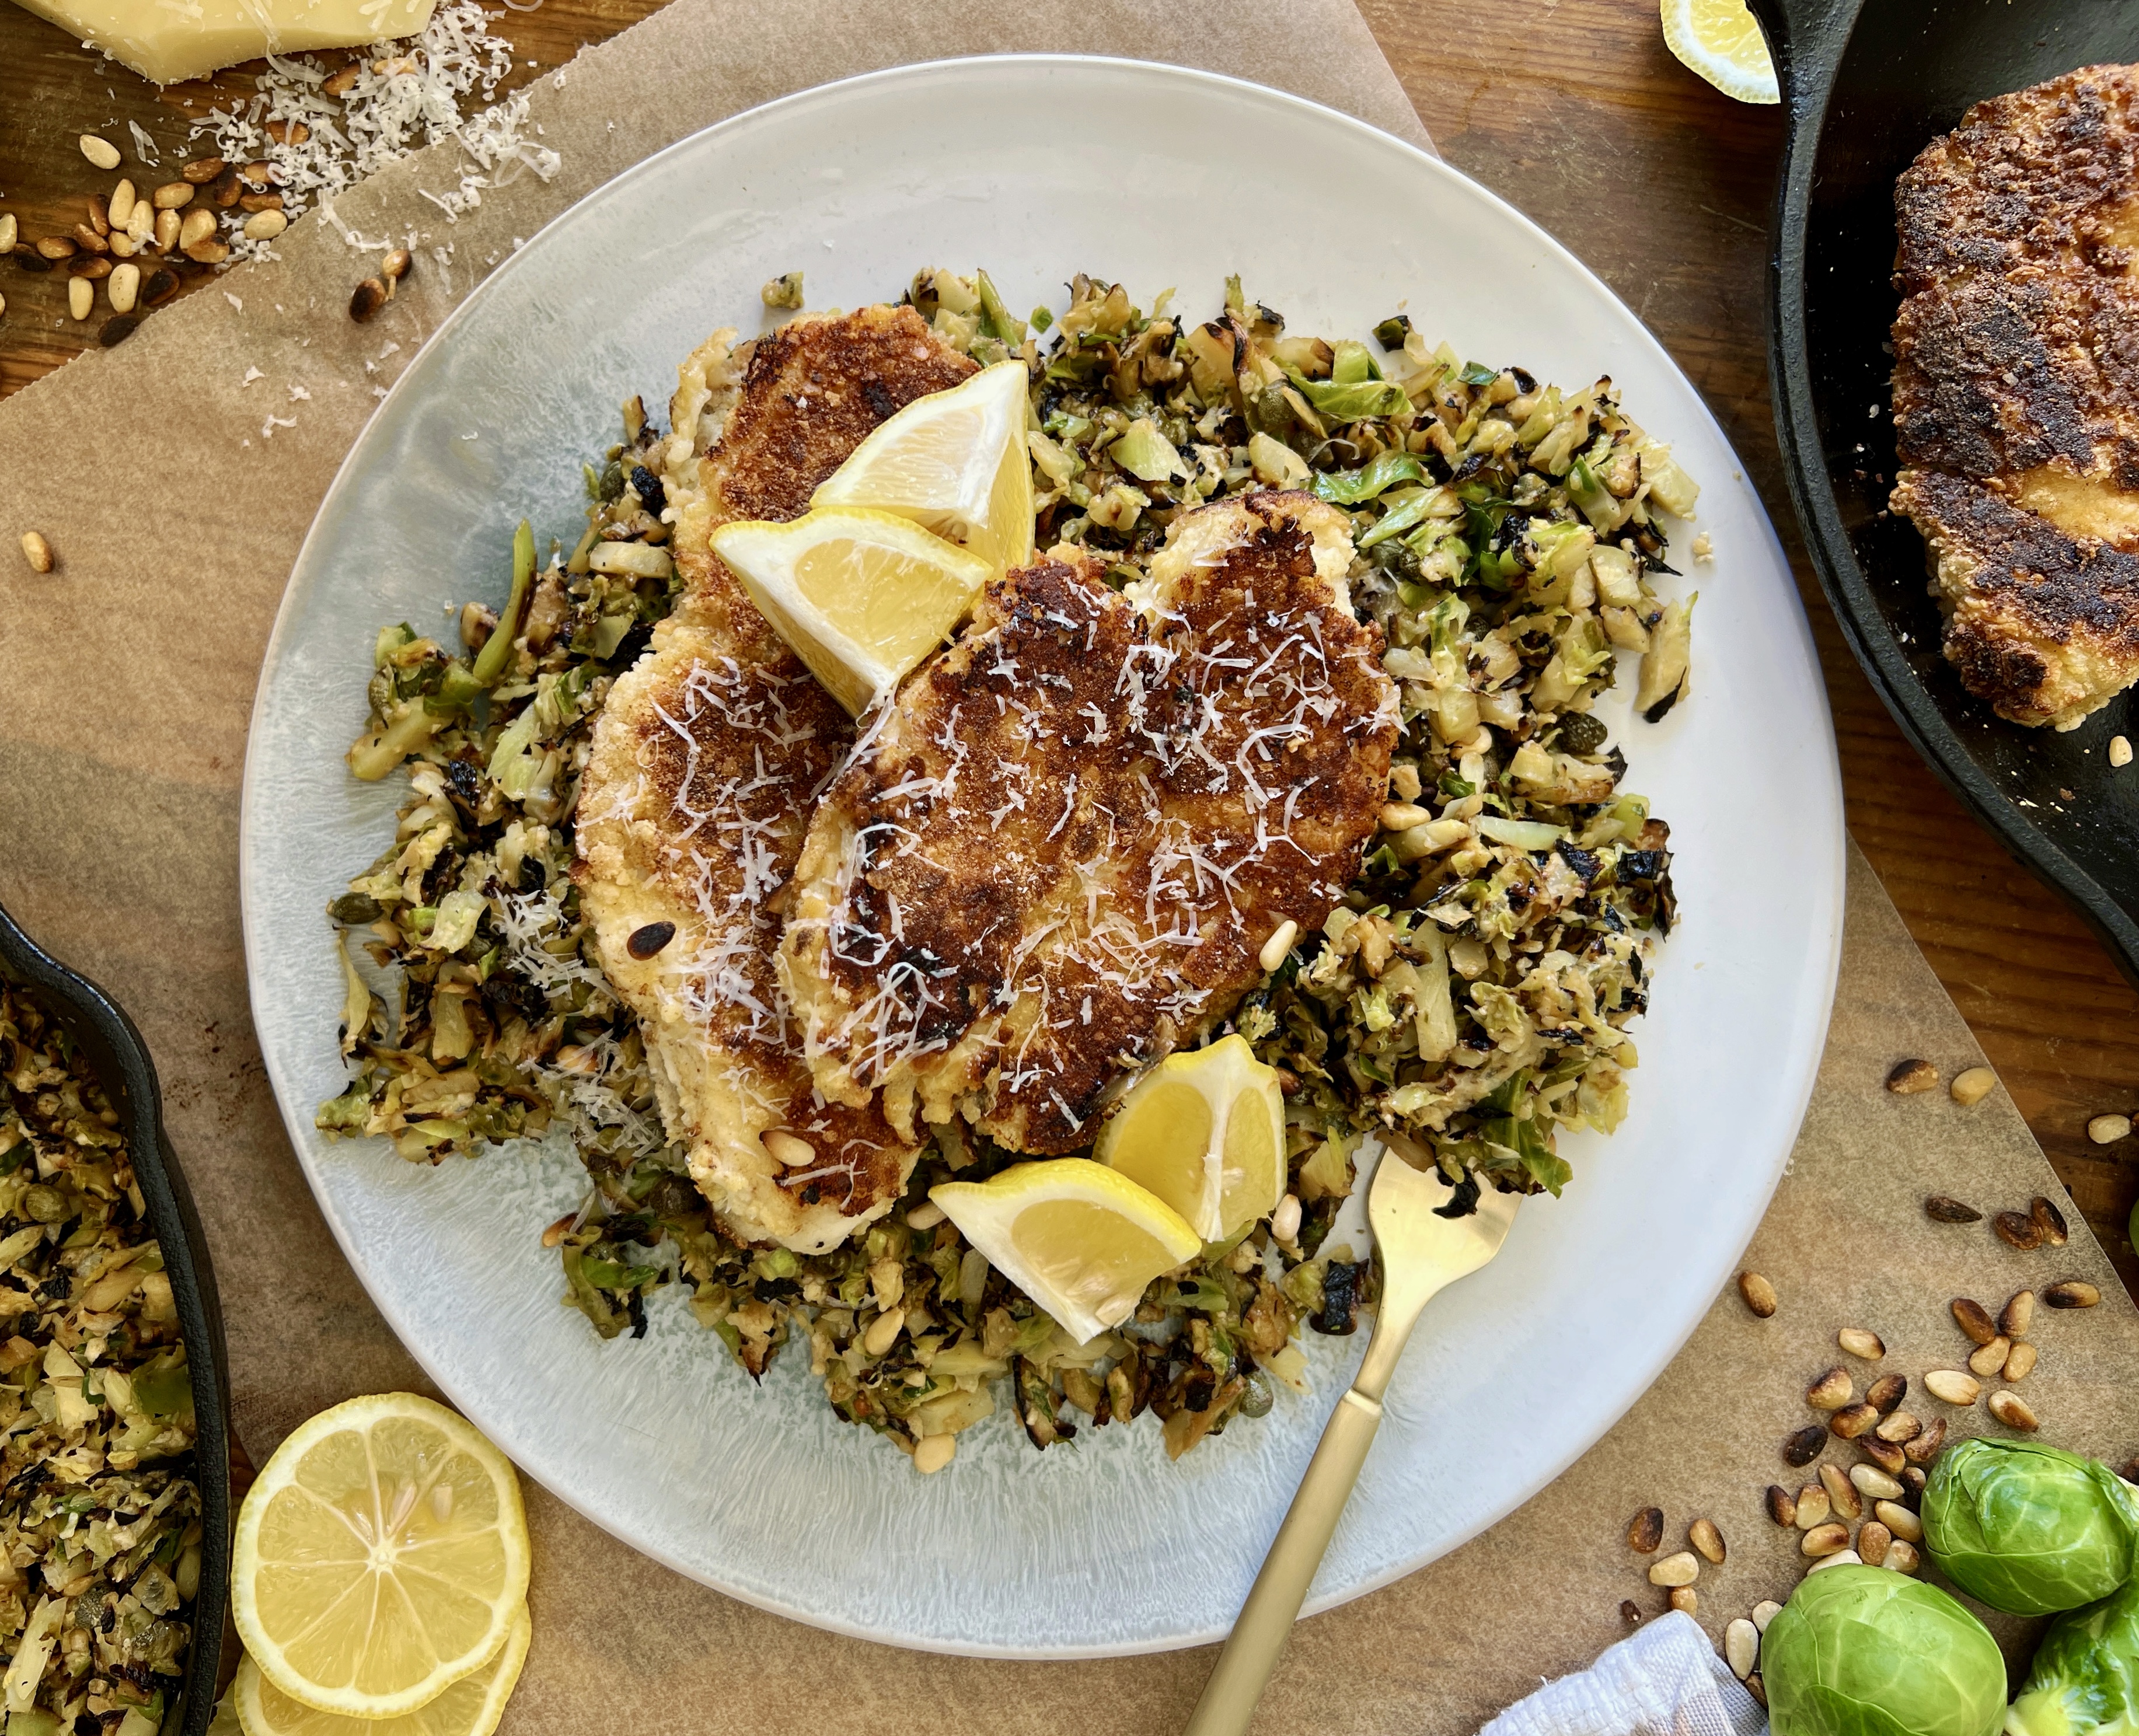  Juicy marinated, golden seared chicken on a simple parmesan briney brussels hash: this Crispy Chicken Over Lemon Caper Brussels is a burst of flavor!